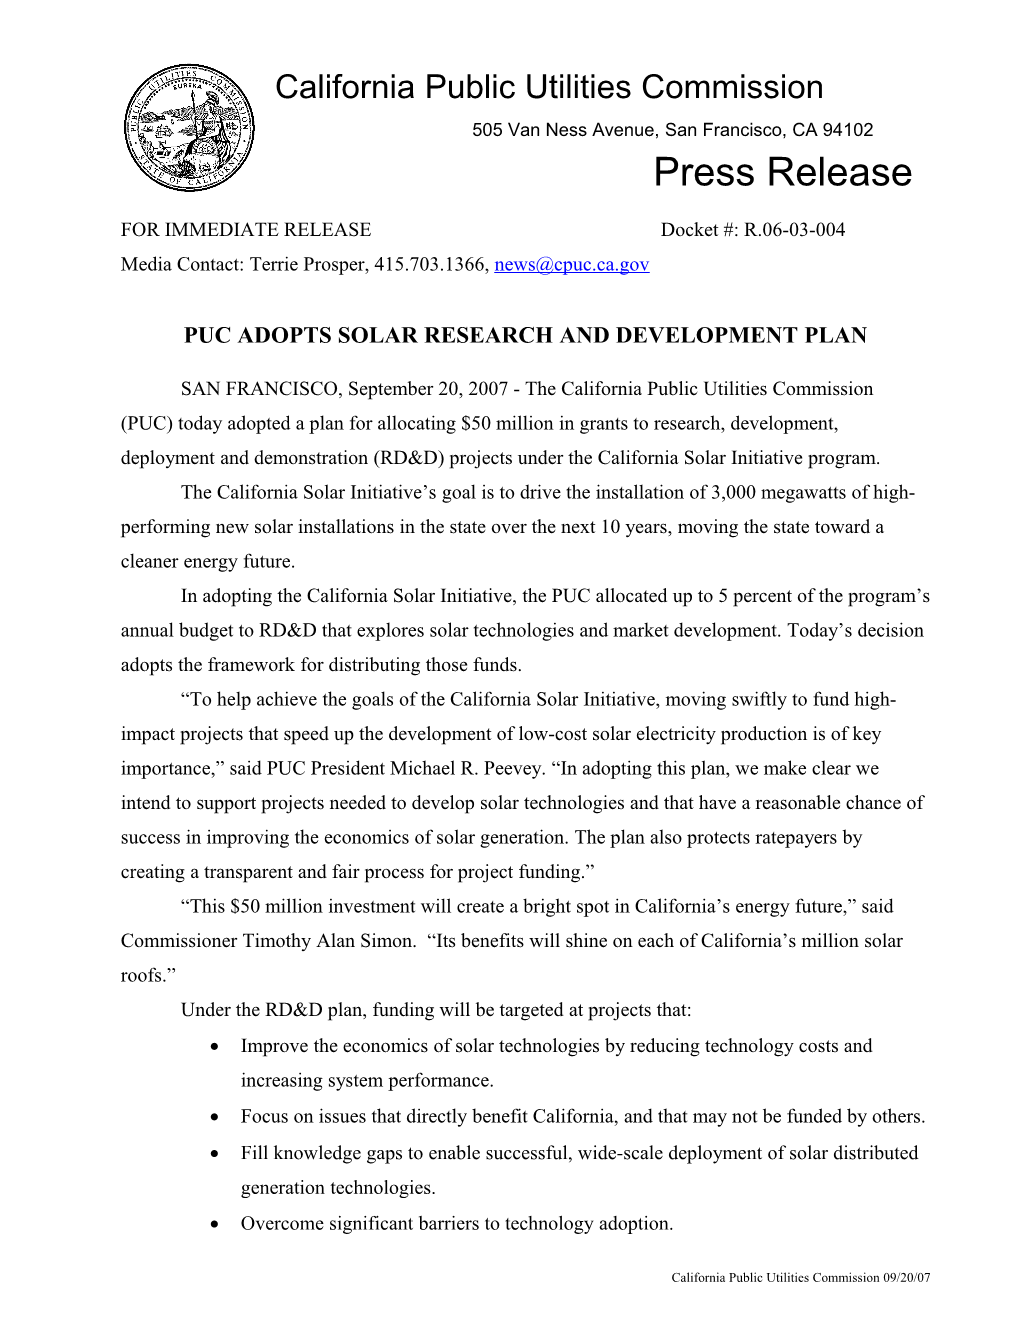 Puc Adopts Solar Research and Development Plan